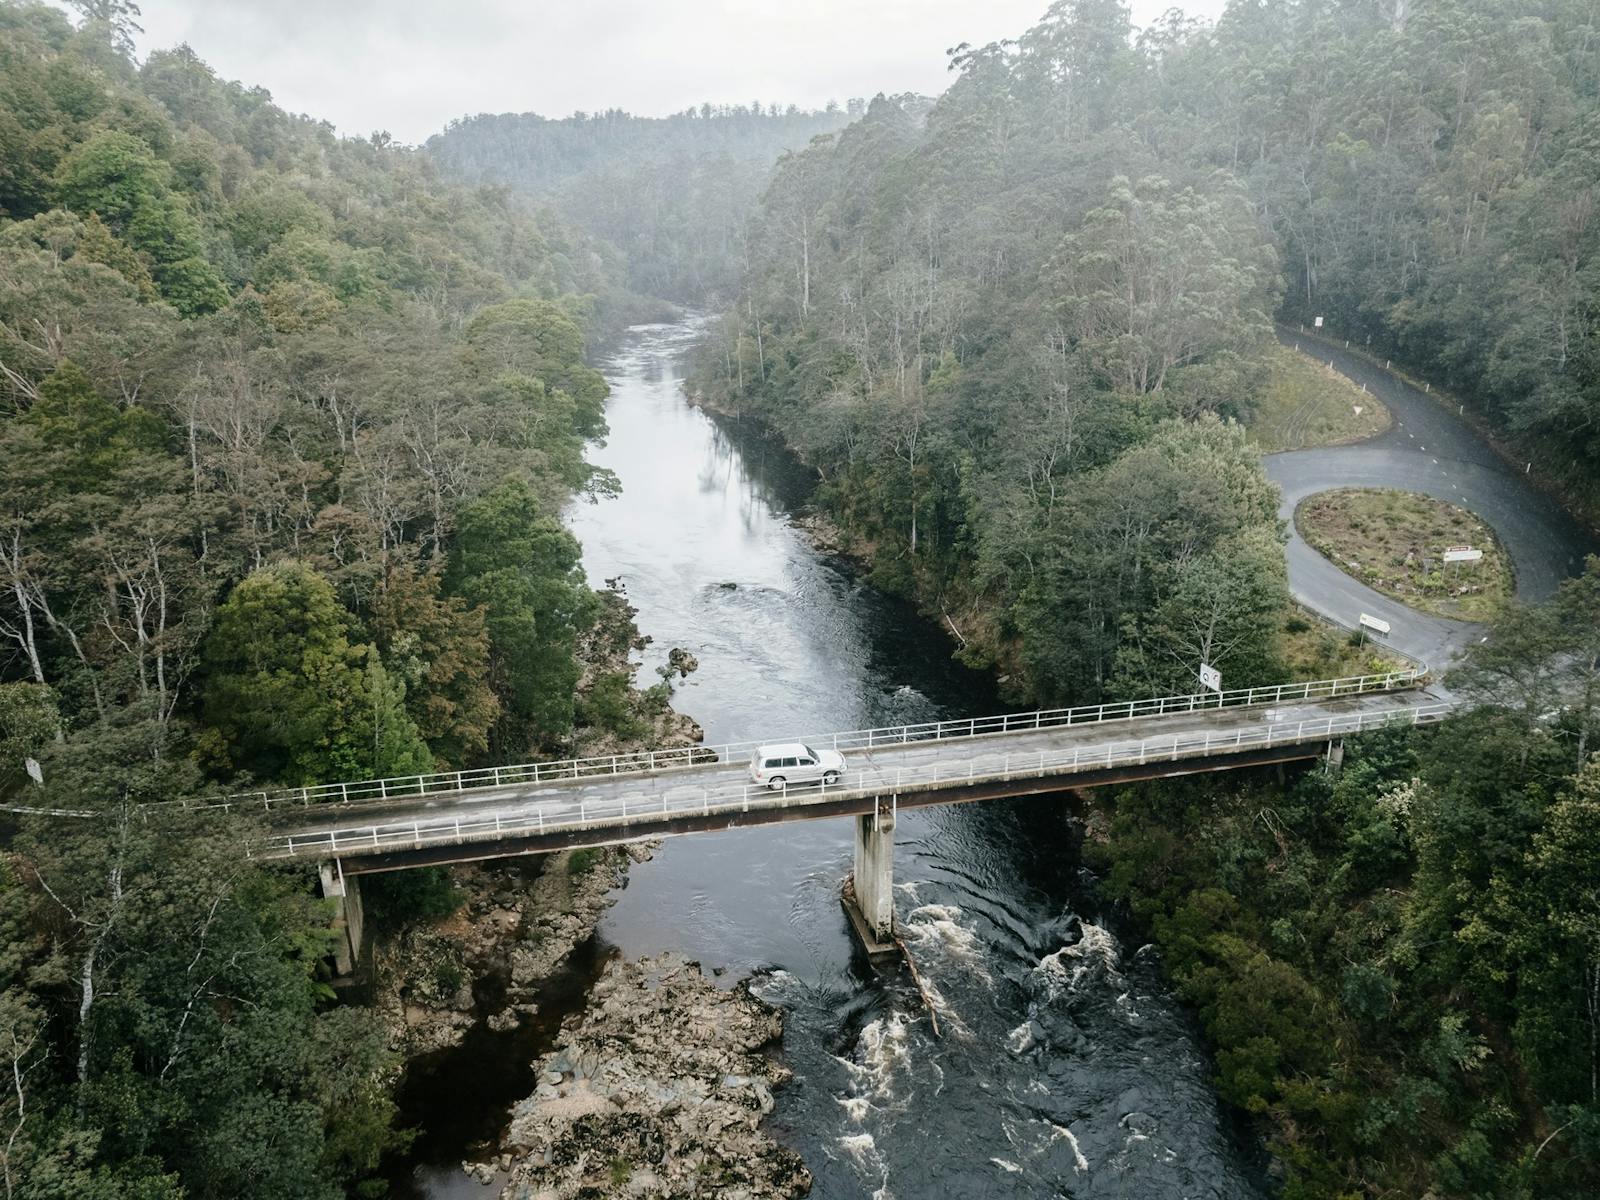 Aerial shot of the vehicle driving across the Arthur River